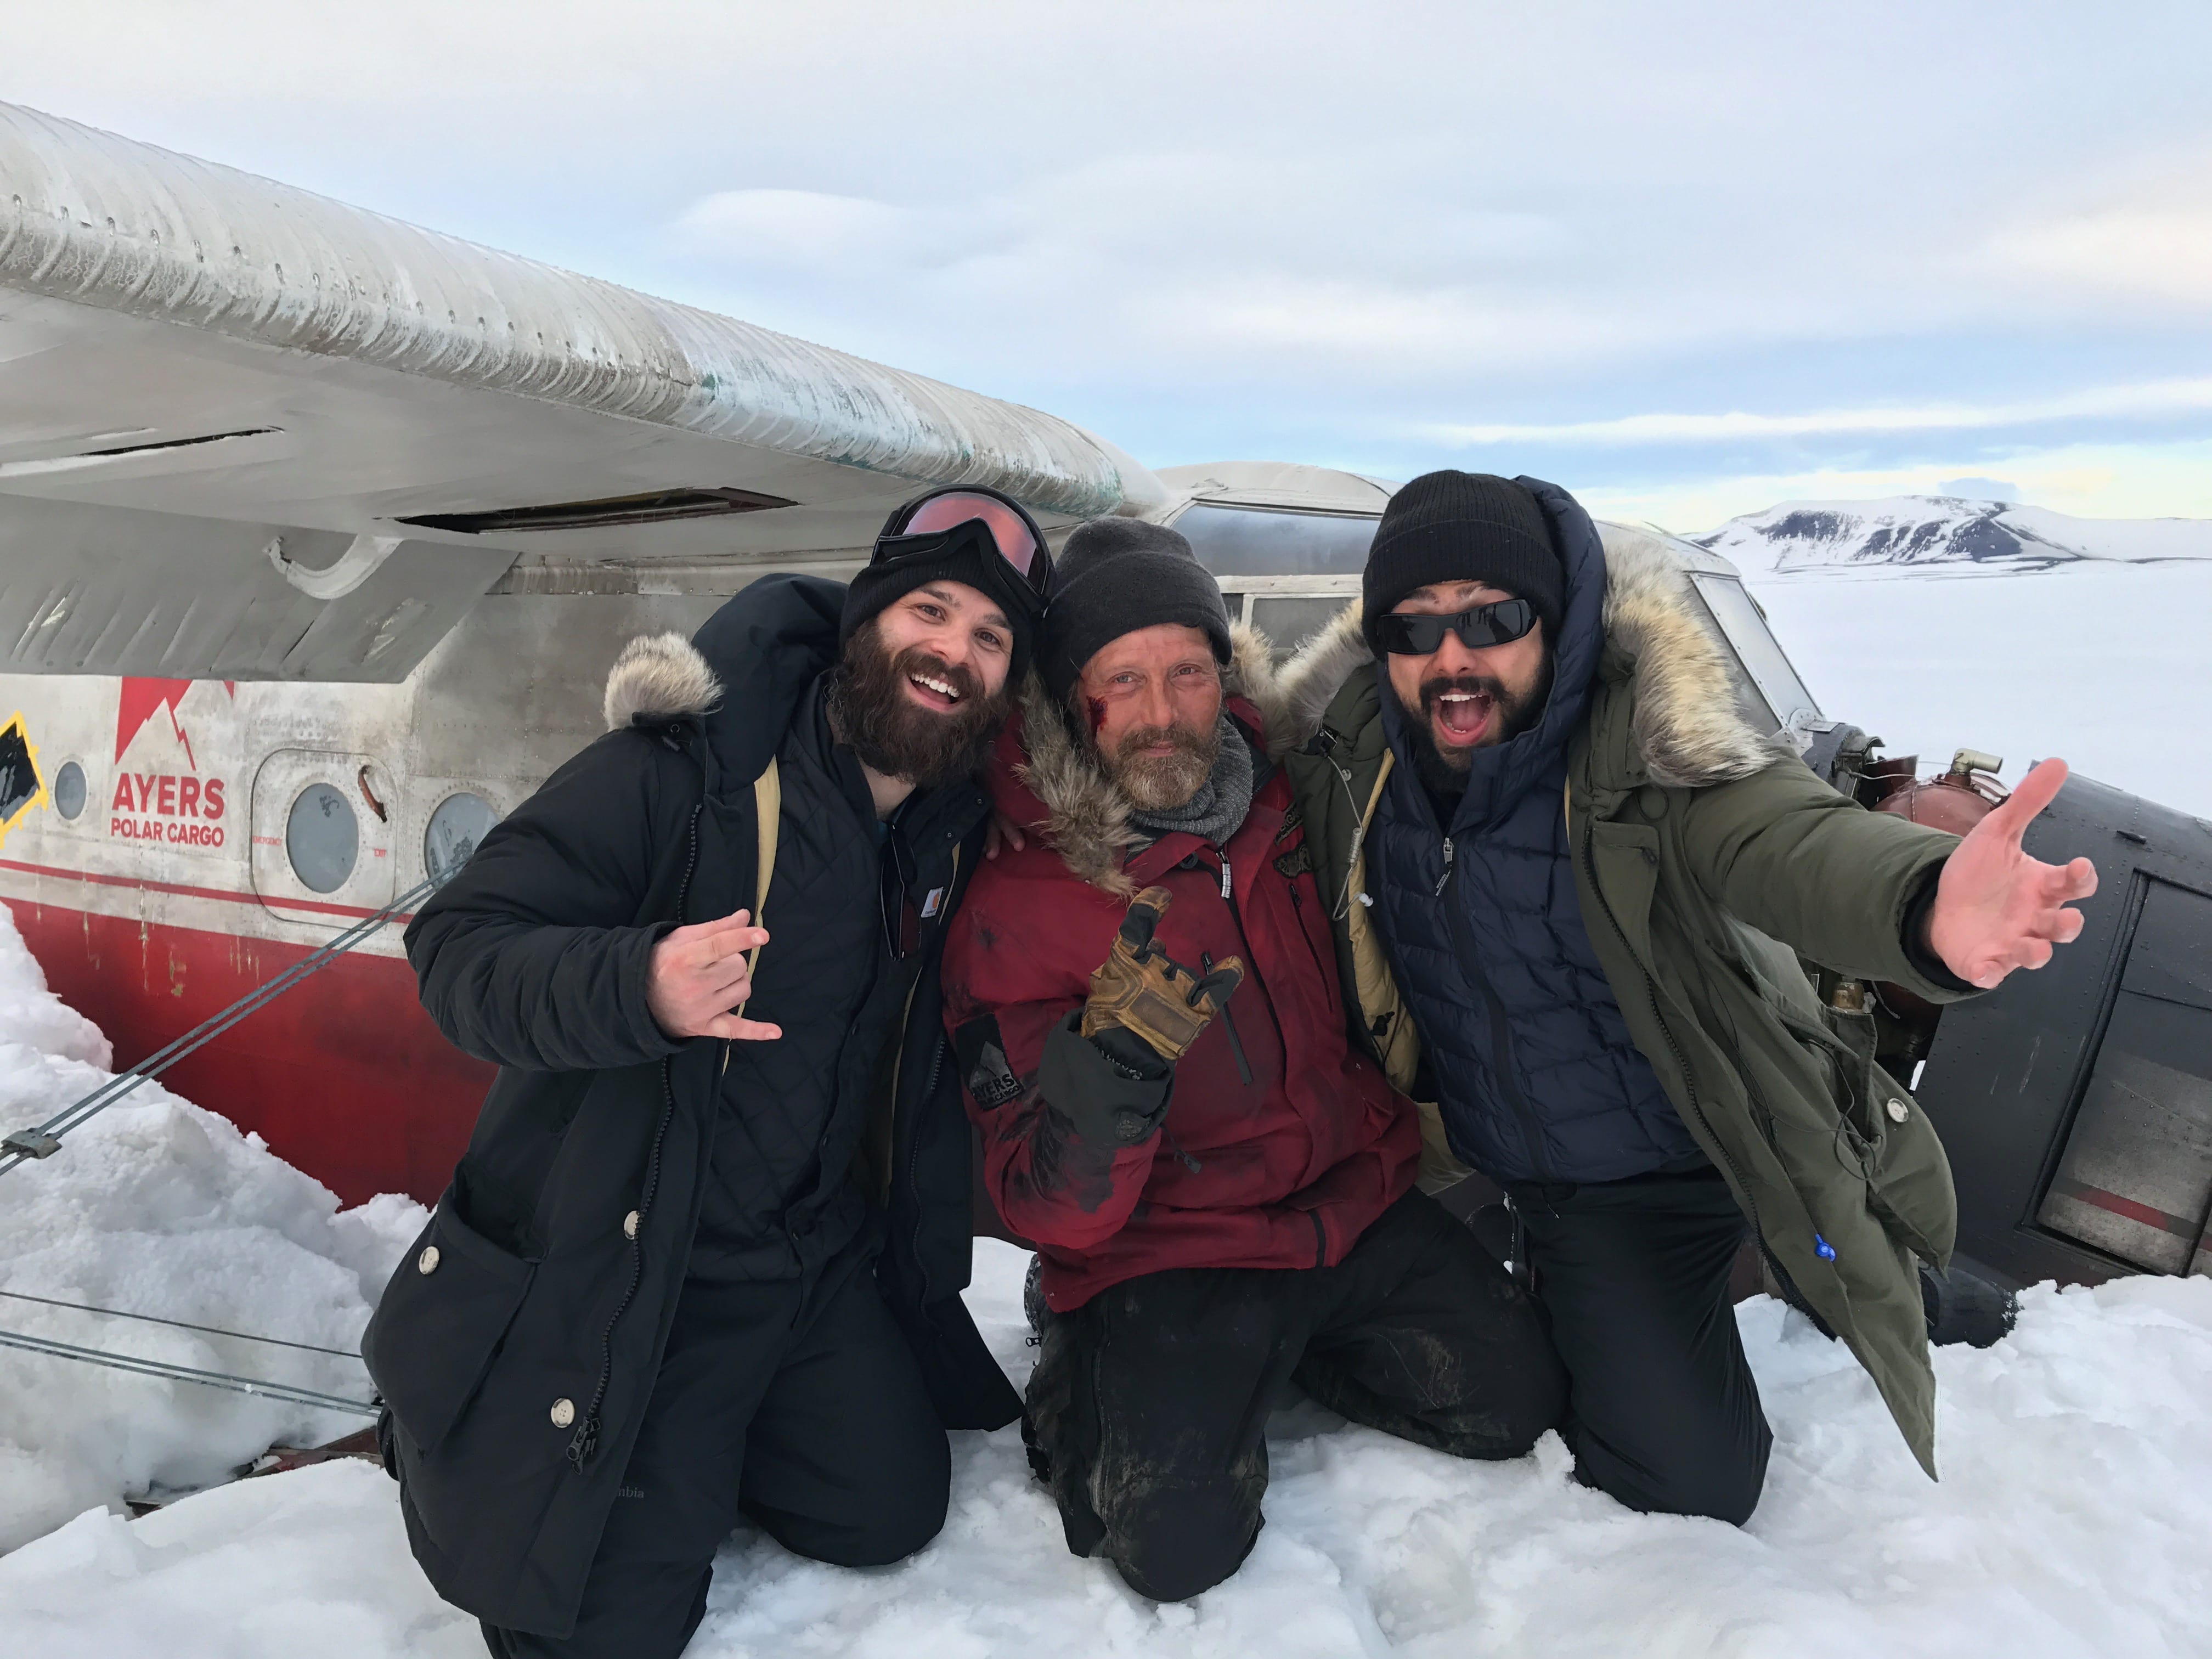 Ryan Morrison, the film's star actor Mads Mikkelsen, and director Joe Penna on set of 'Arctic' in Iceland.